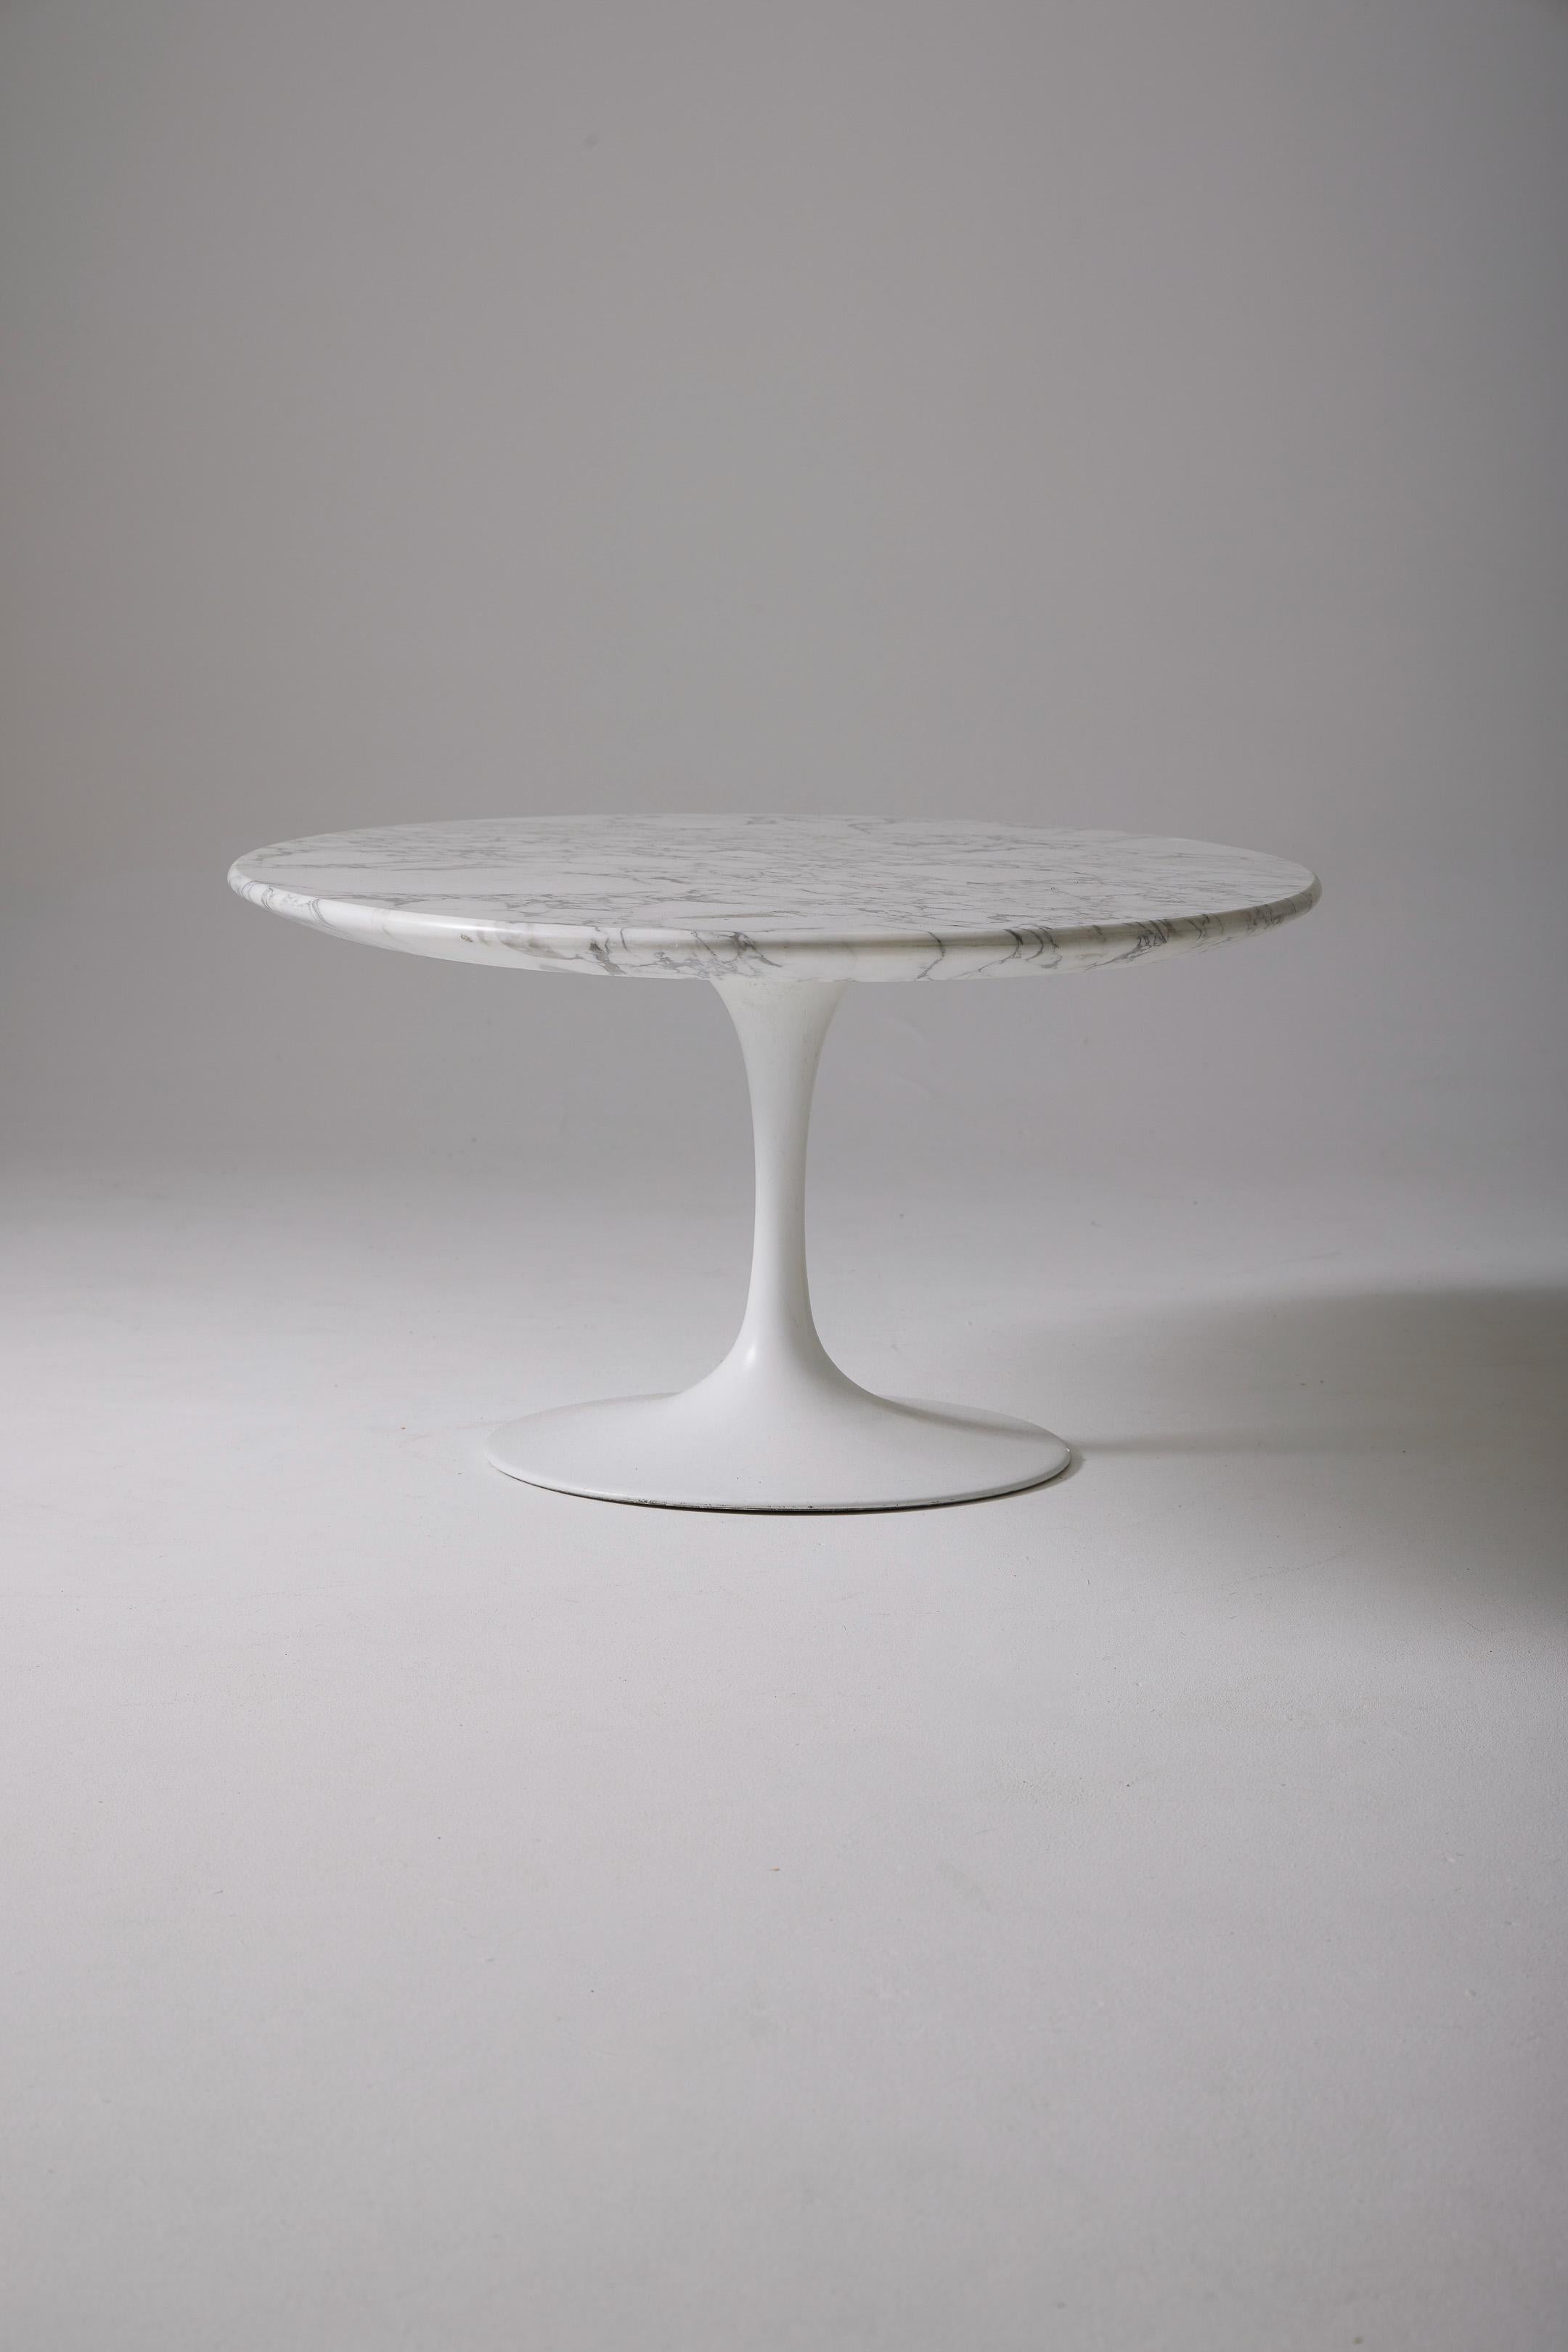 Coffee table from the Parallel Bar collection by designer Florence Knoll for Knoll International, 1950s. The round walnut tabletop rests on 4 brushed metal legs. Very good condition.
DV440